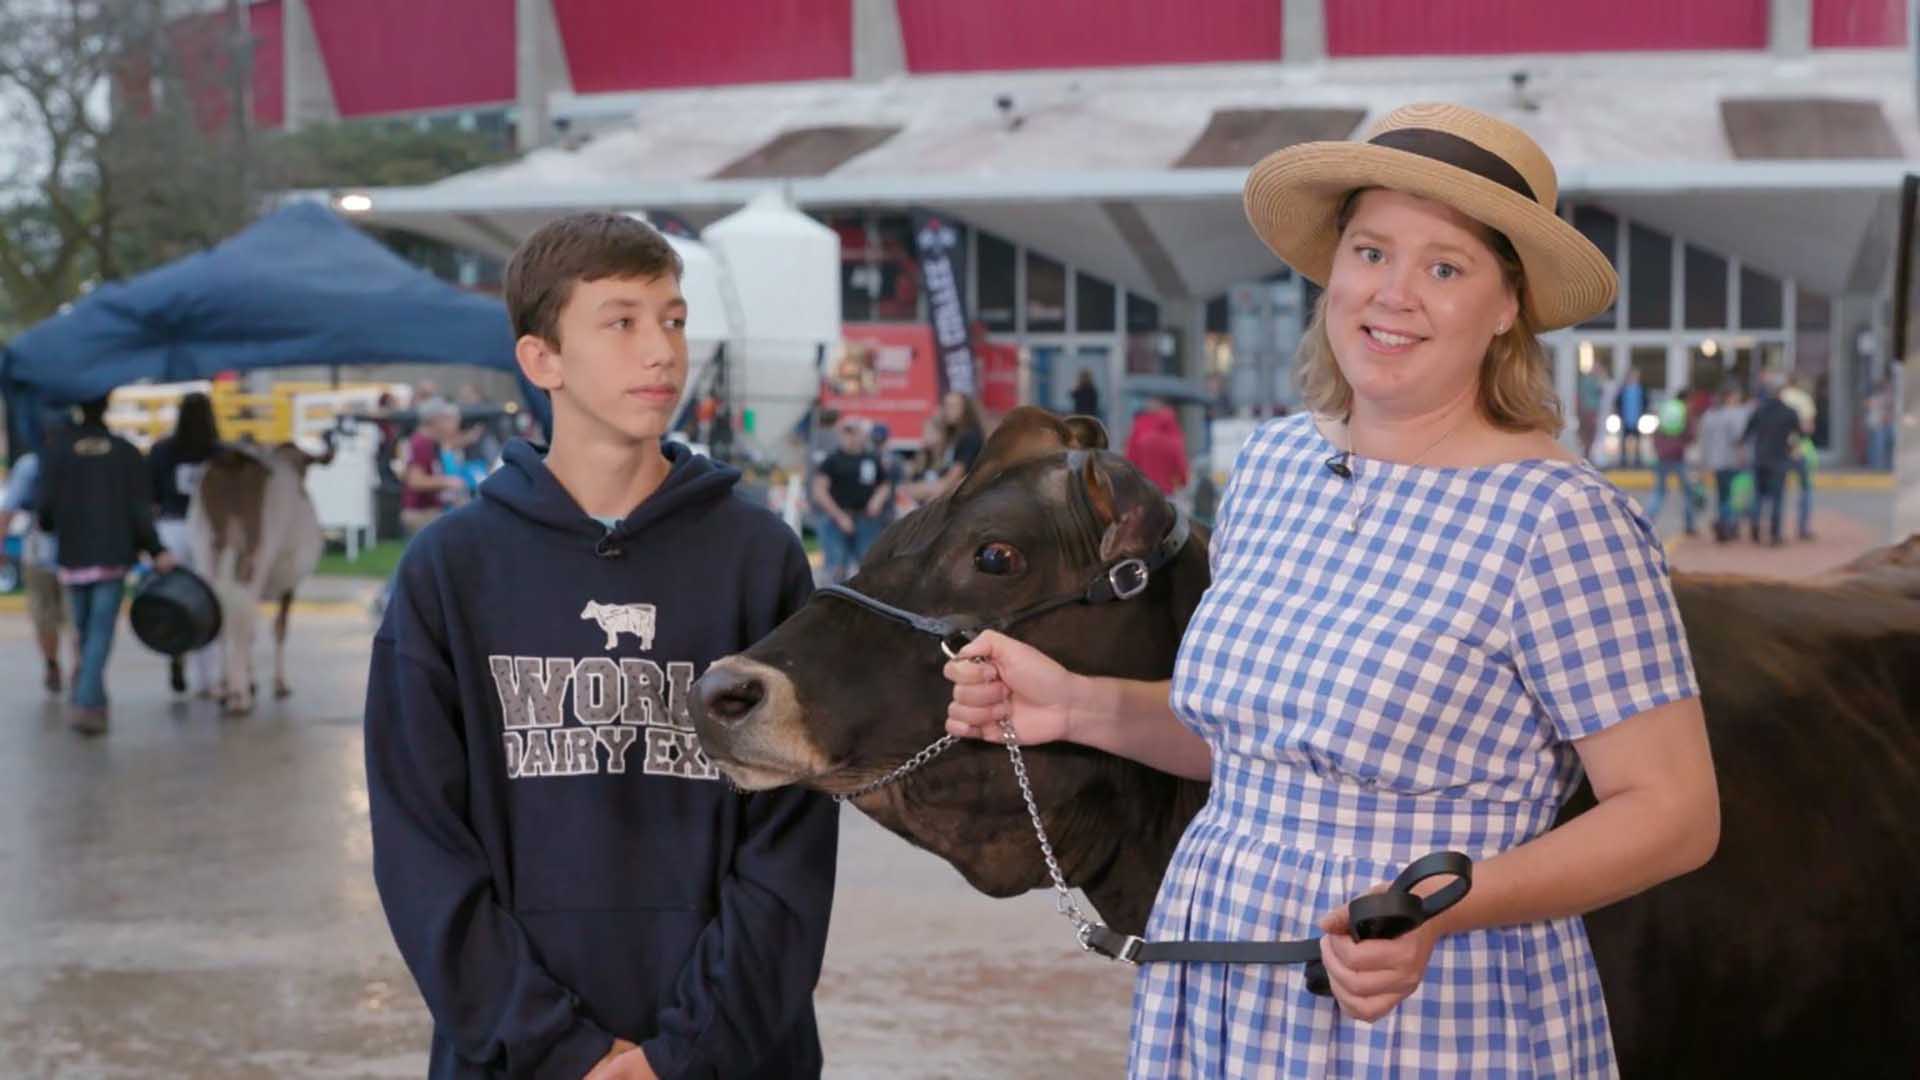 A person holds handles for a cow while a teenager looks at them.